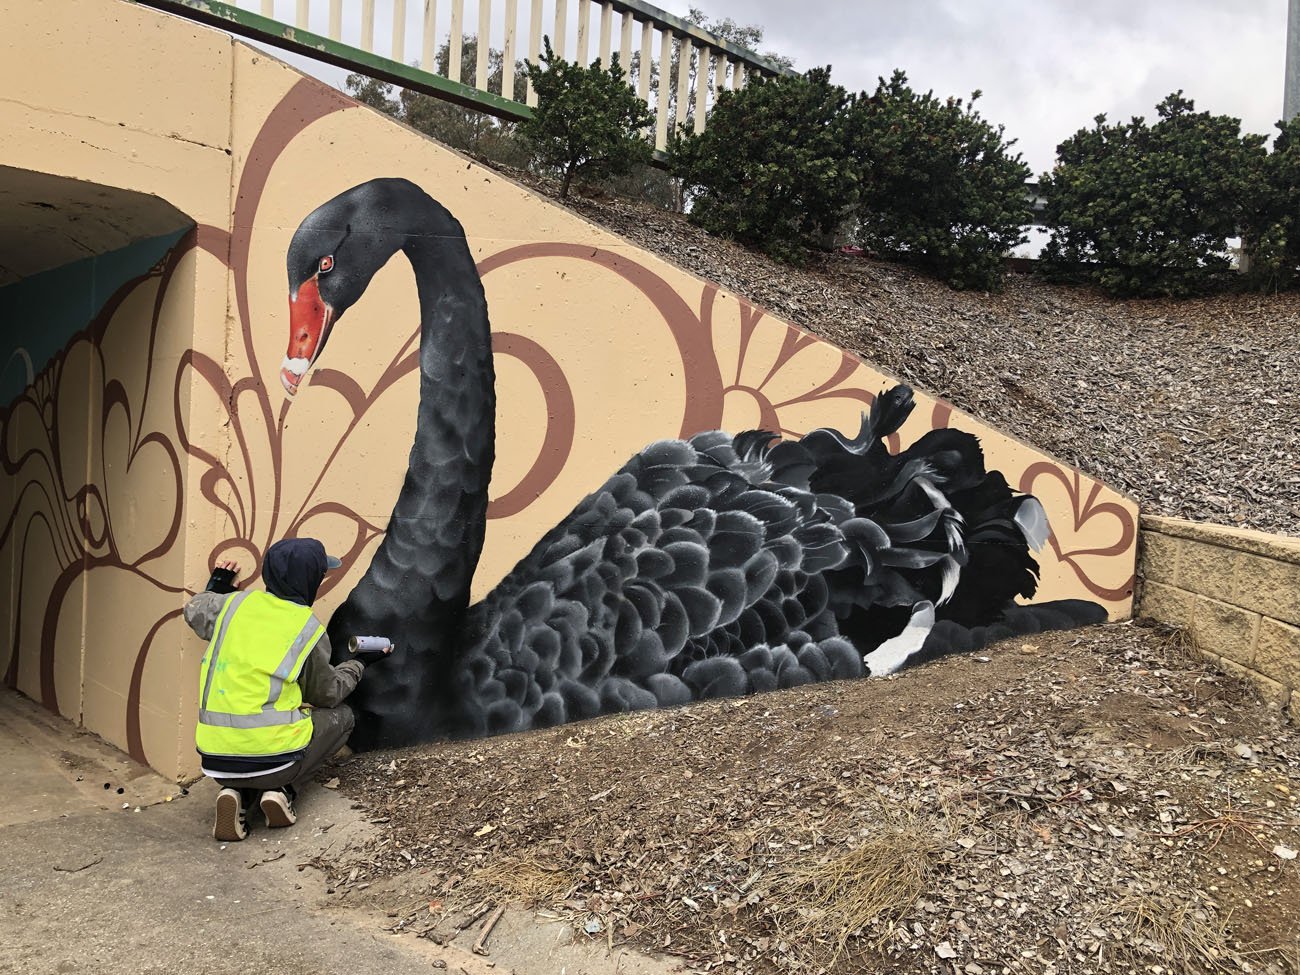 Pond Pals Underpass Mural In Wodonga